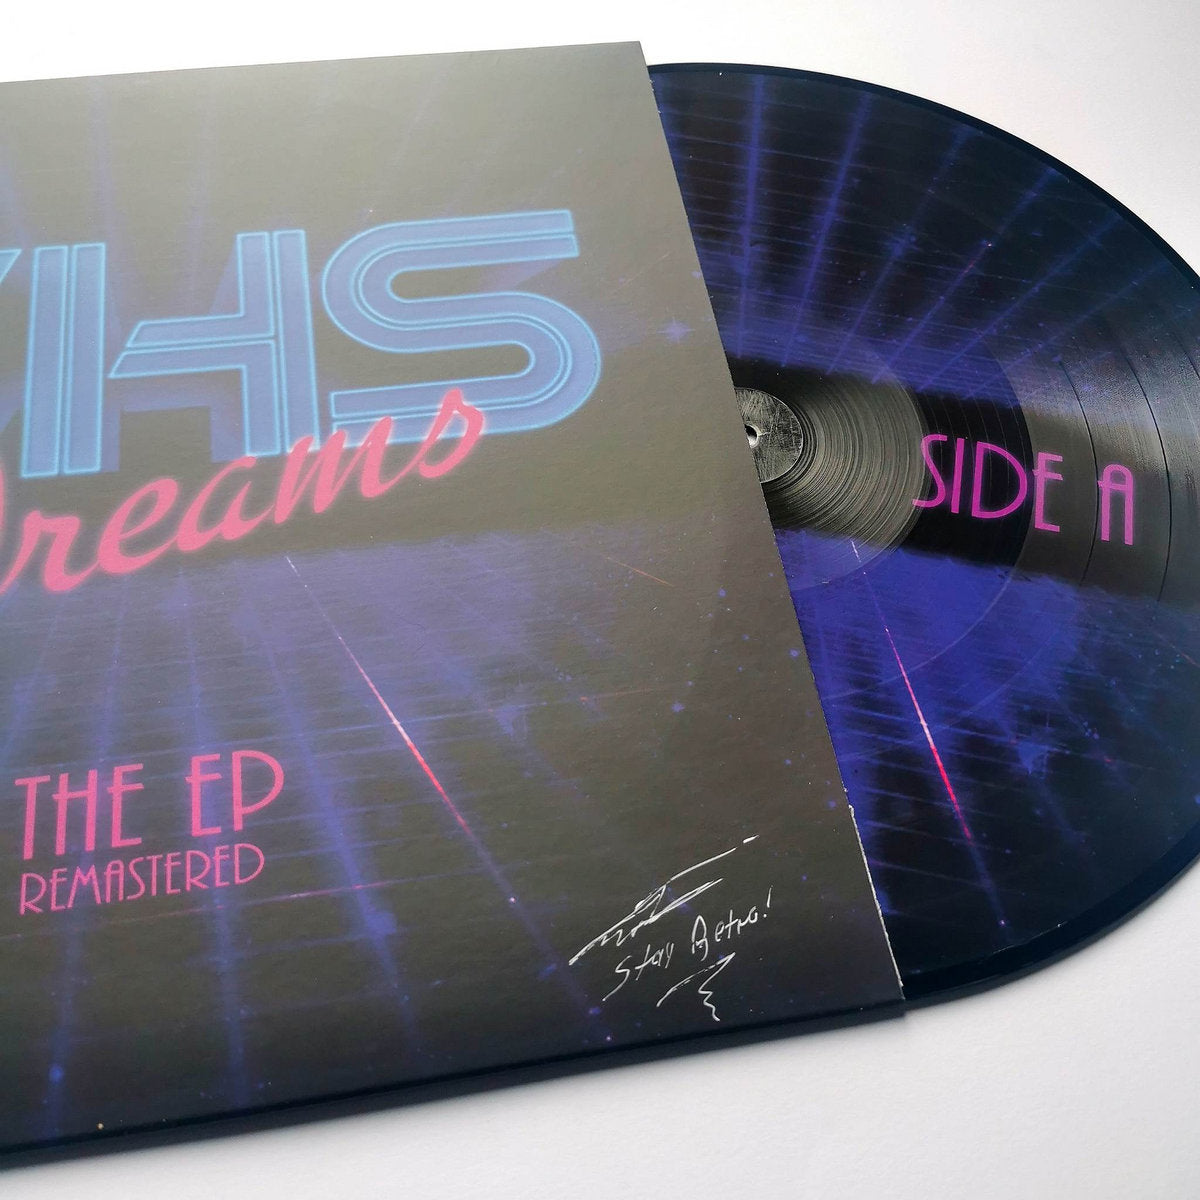 "VHS Dreams: The EP" (Remastered) - *Signed* Picture Disk Vinyl